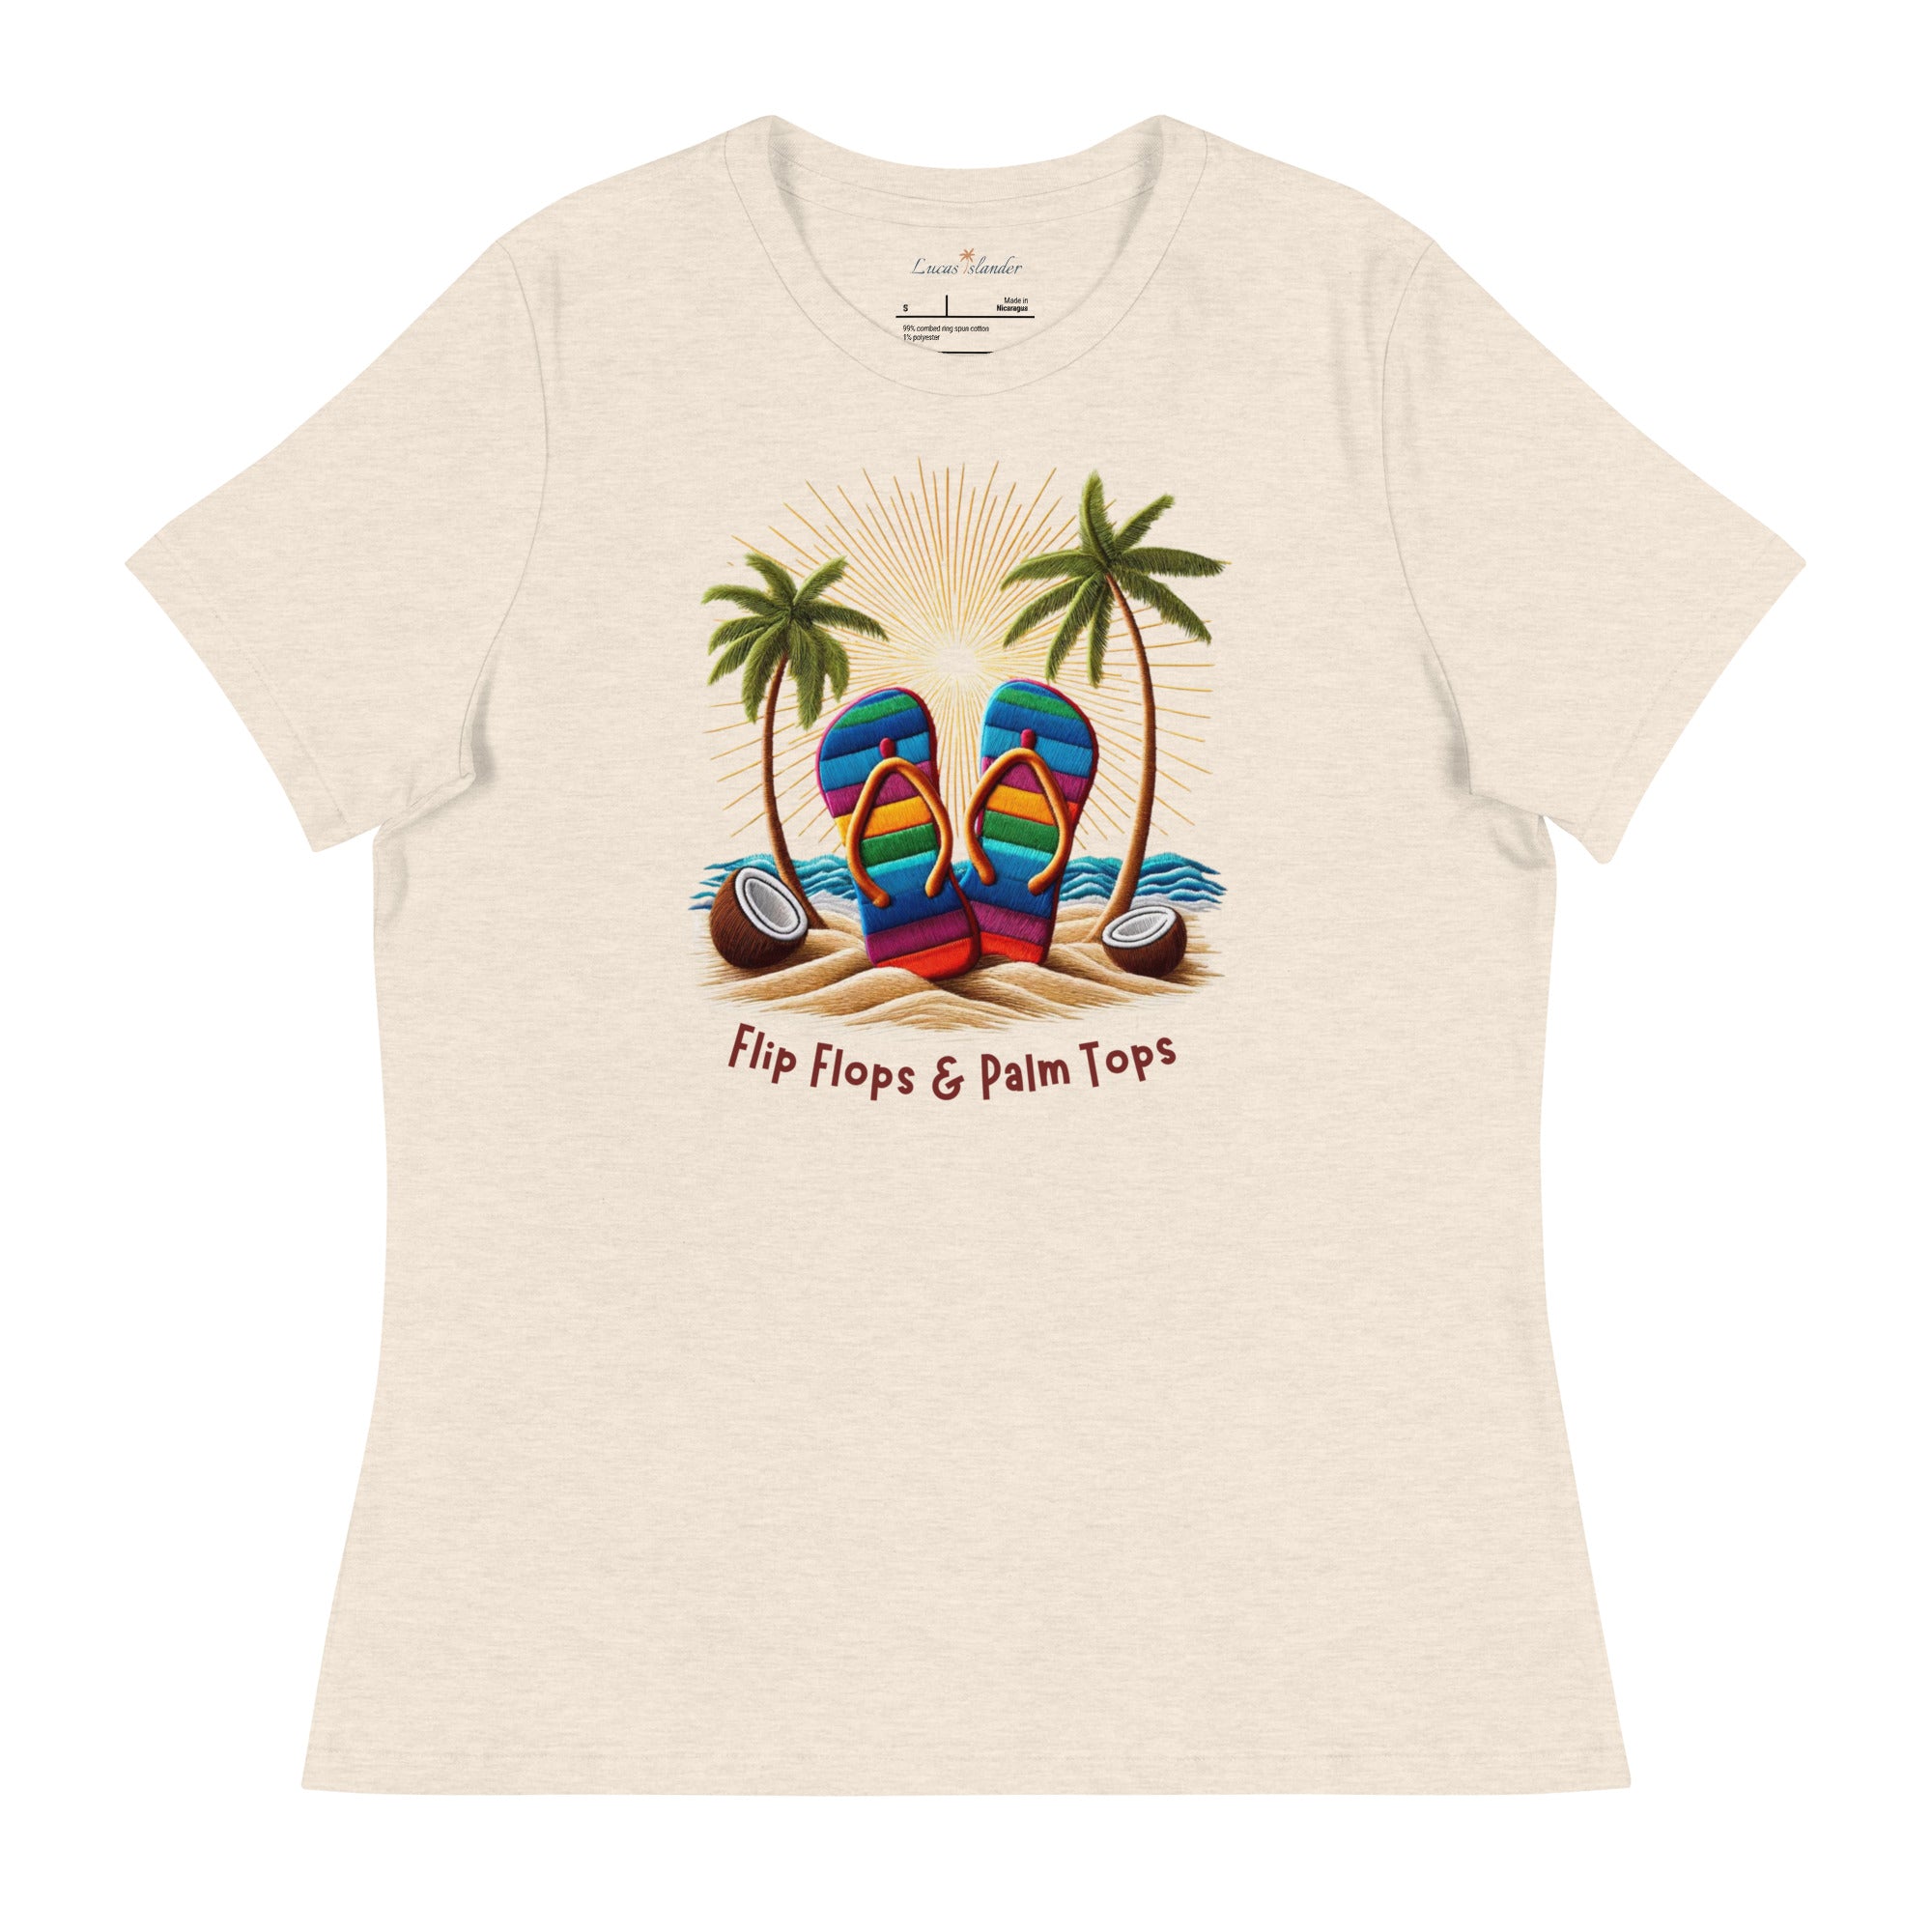 Experience Everyday Luxury with the Flip Flops & Palm Tops Women's Tee